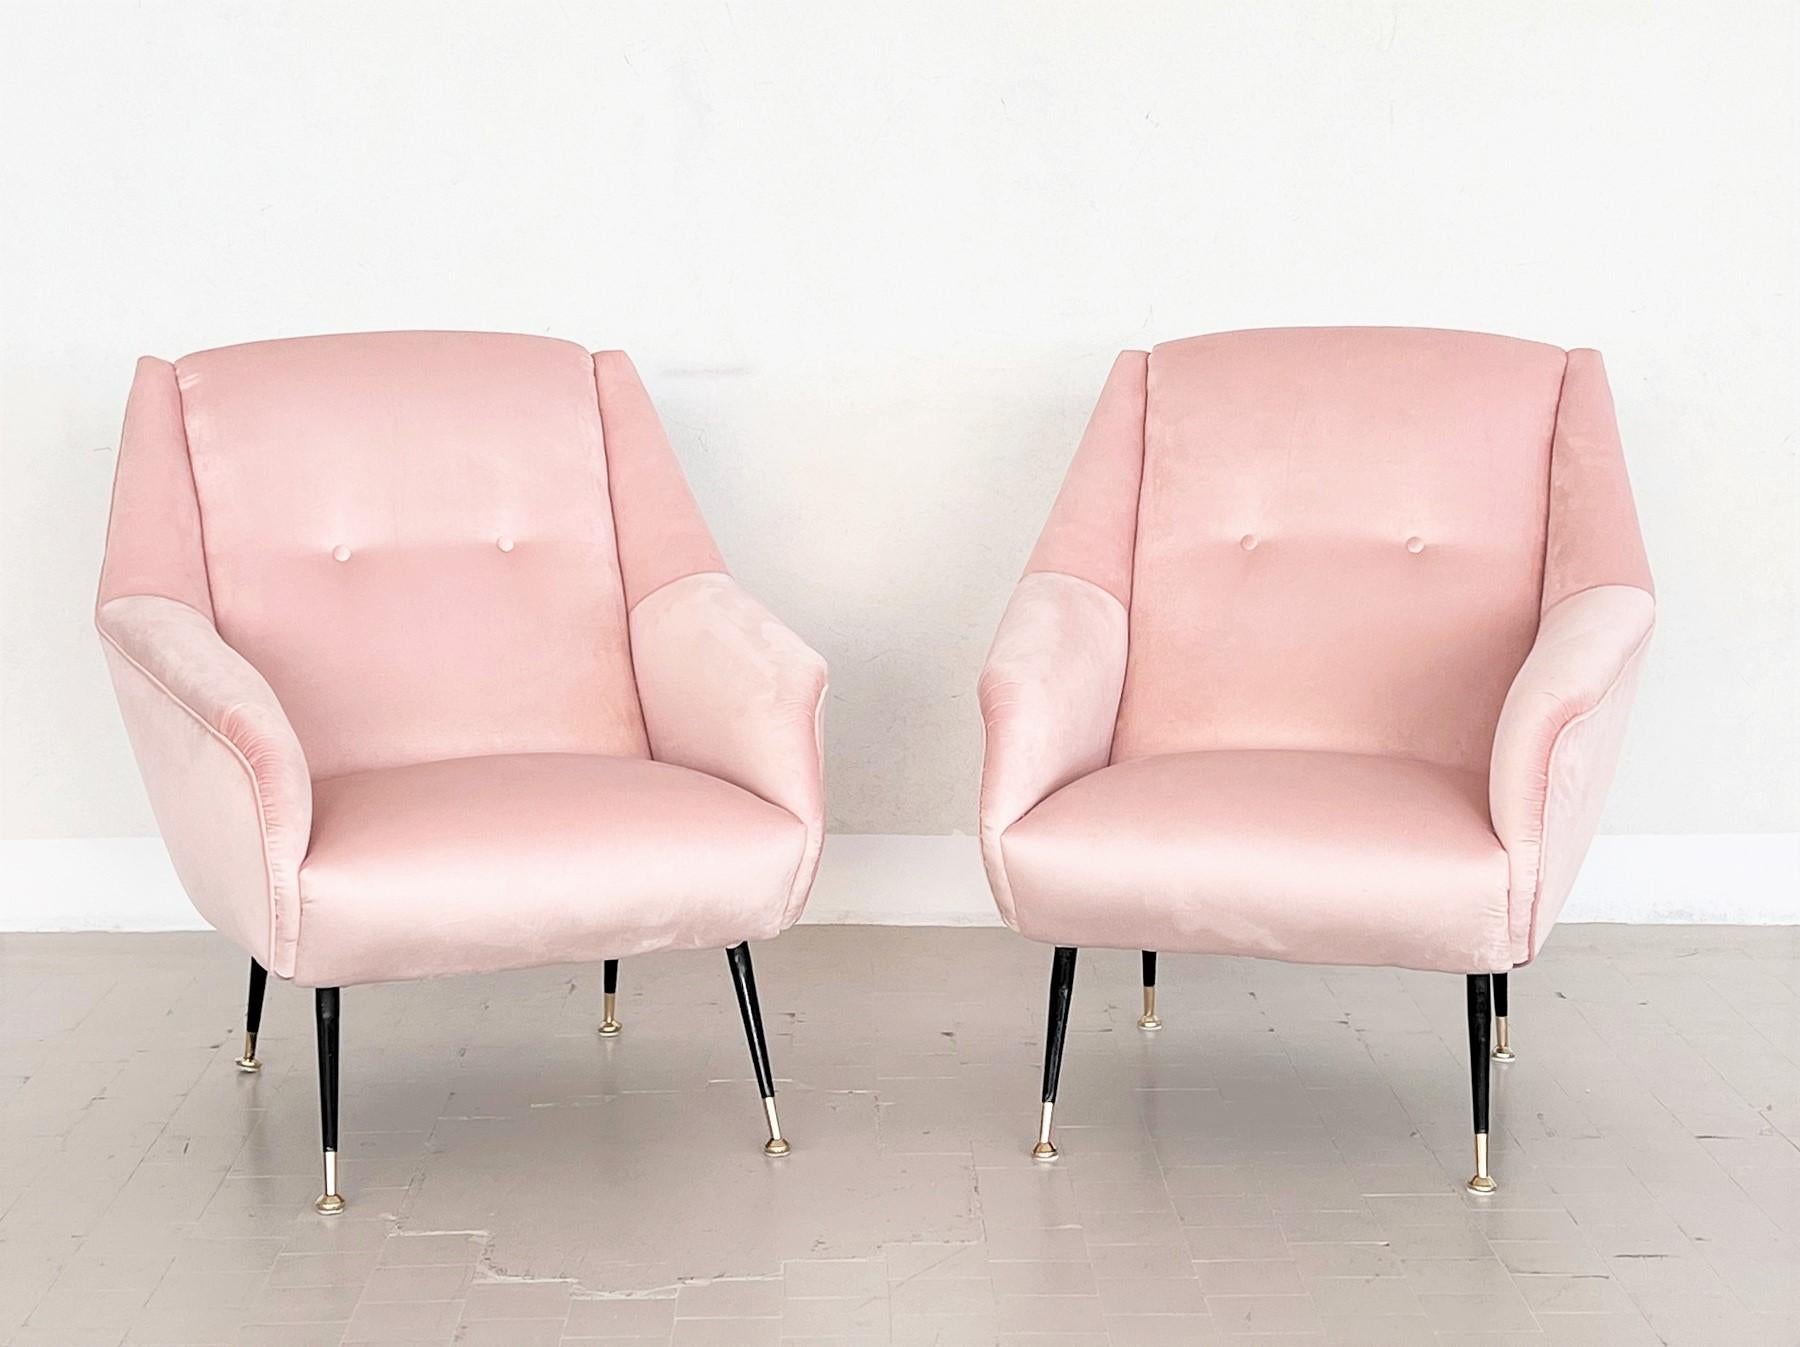 Mid-Century Modern Italian Midcentury Armchairs in Soft Pink Velvet and Brass Tips, 1950s For Sale